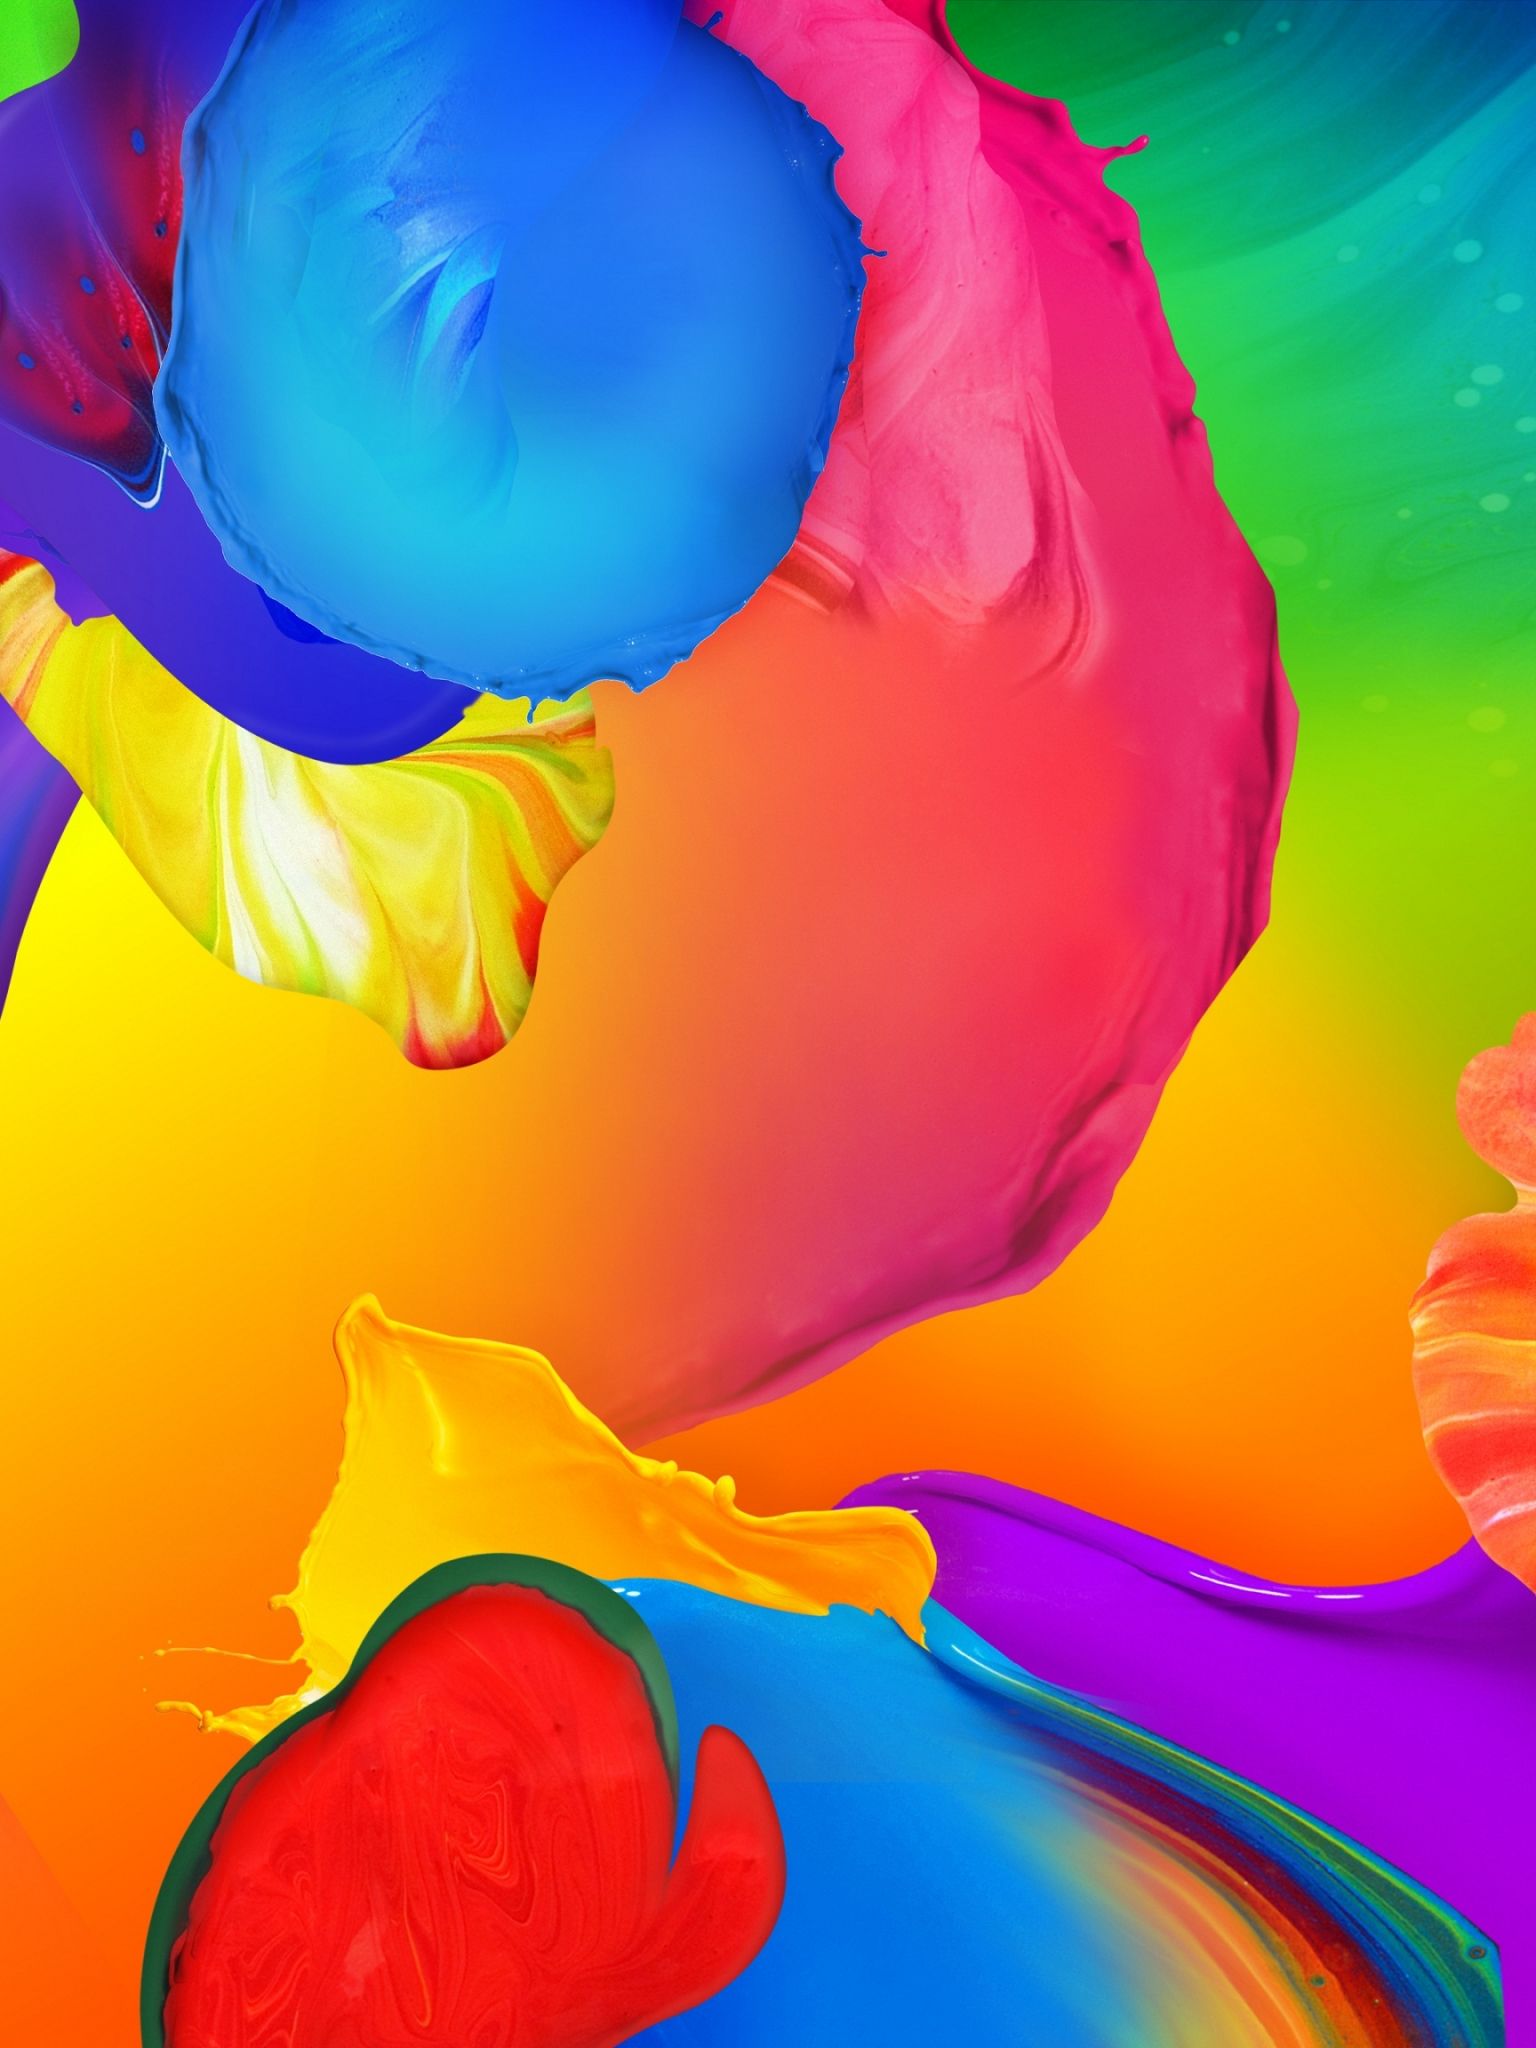 Galaxy Note 3 Wallpapers